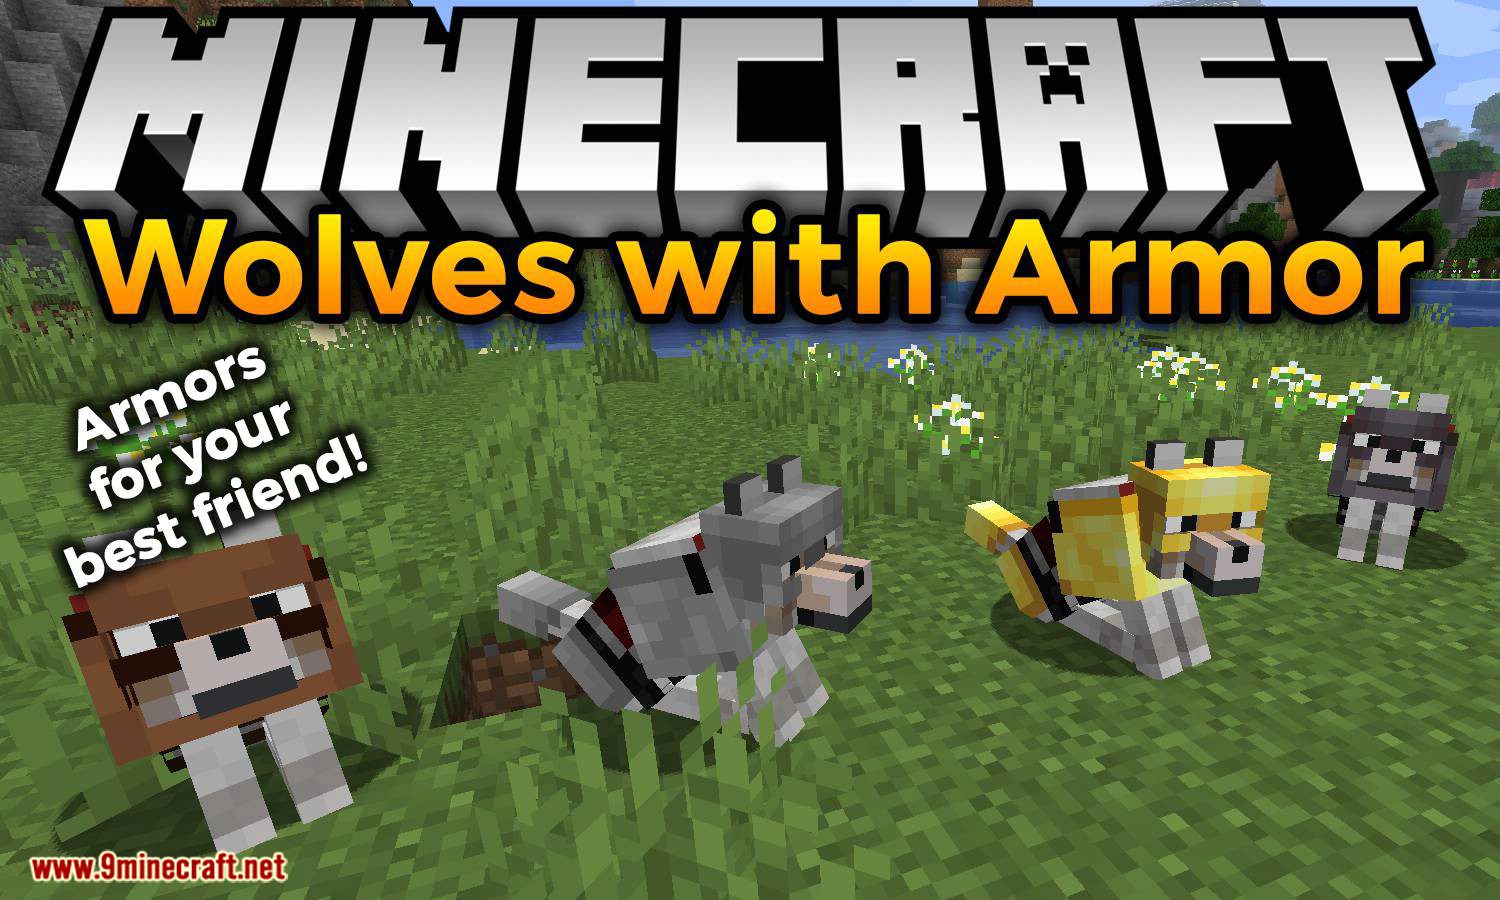 Wolves with armor mod for minecraft logo